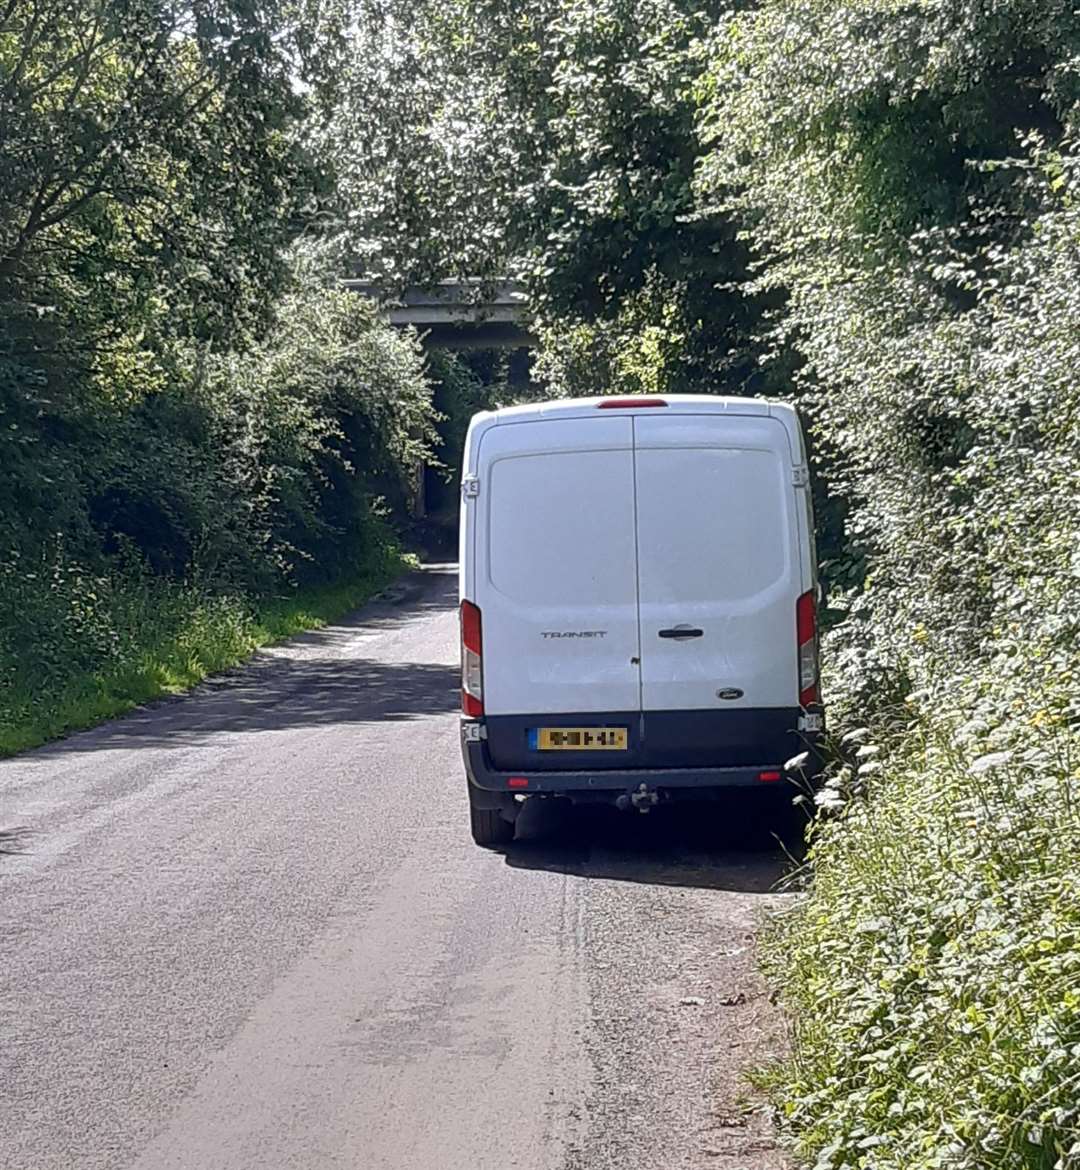 Suspicious men in vans have been seen stopping by the side of the road